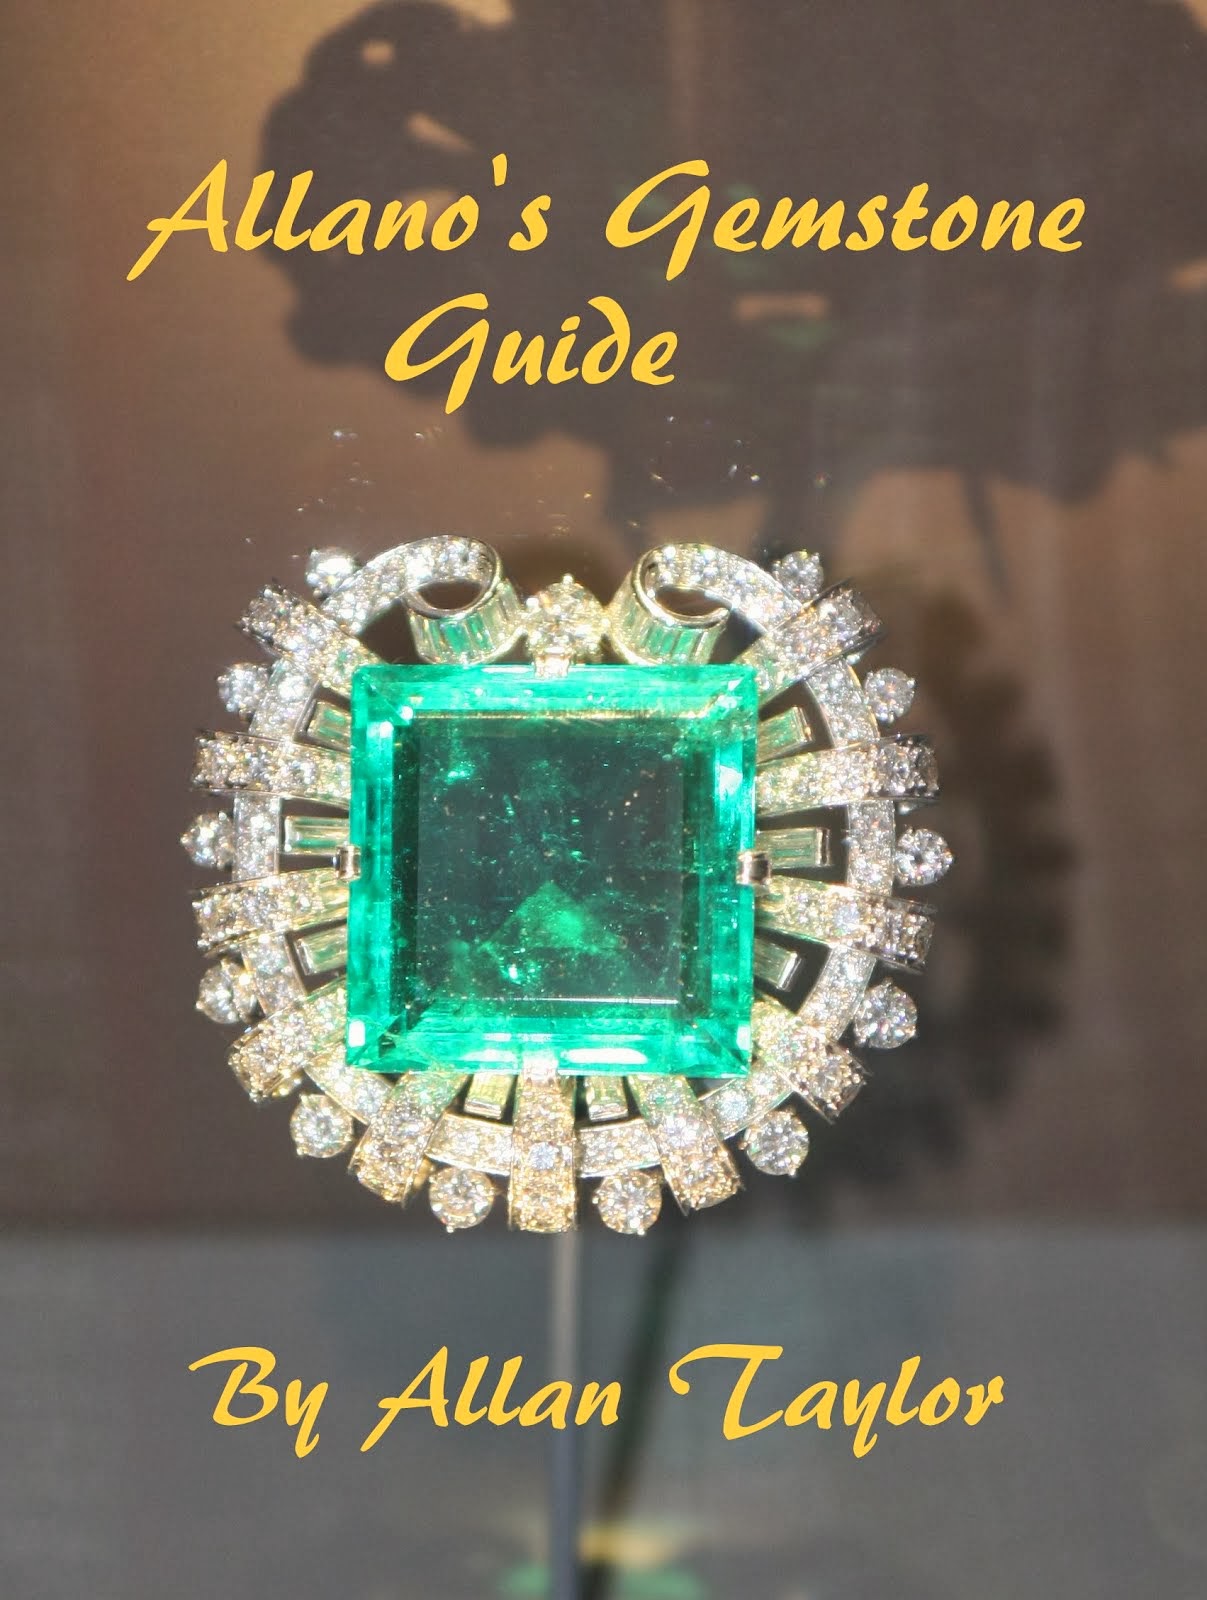 Gemstones from around the world are studied by Allano